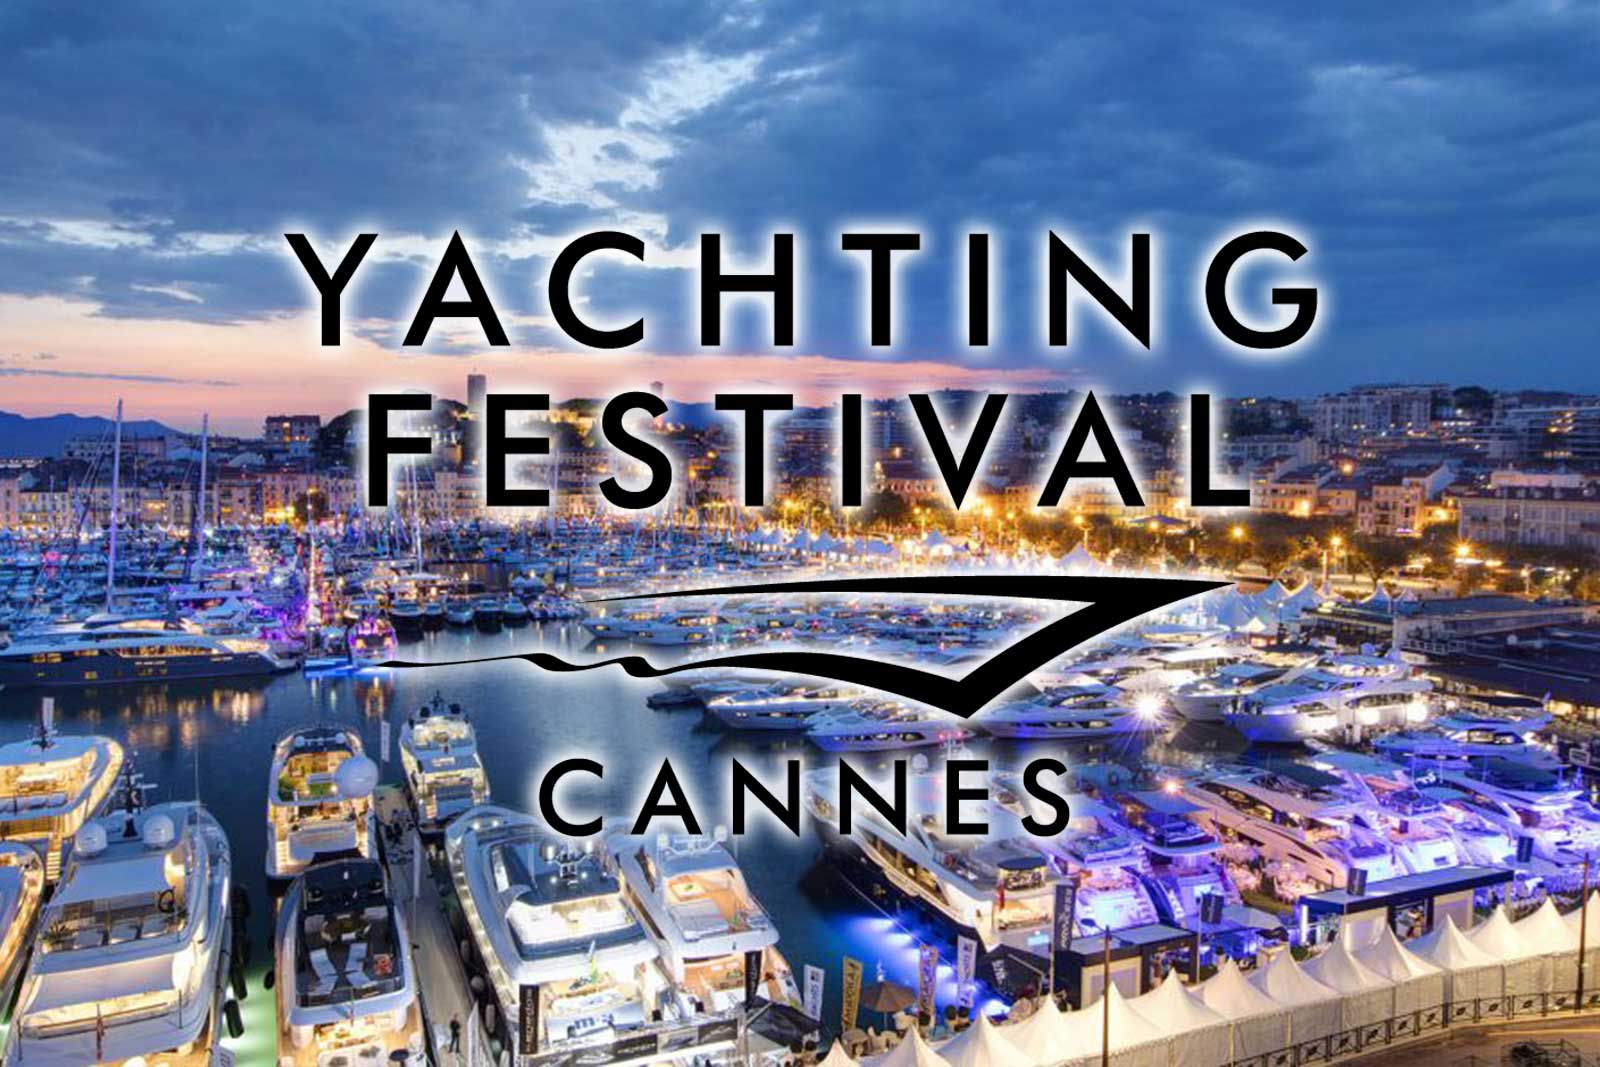 YACHTING FESTIVAL CANNES 2019